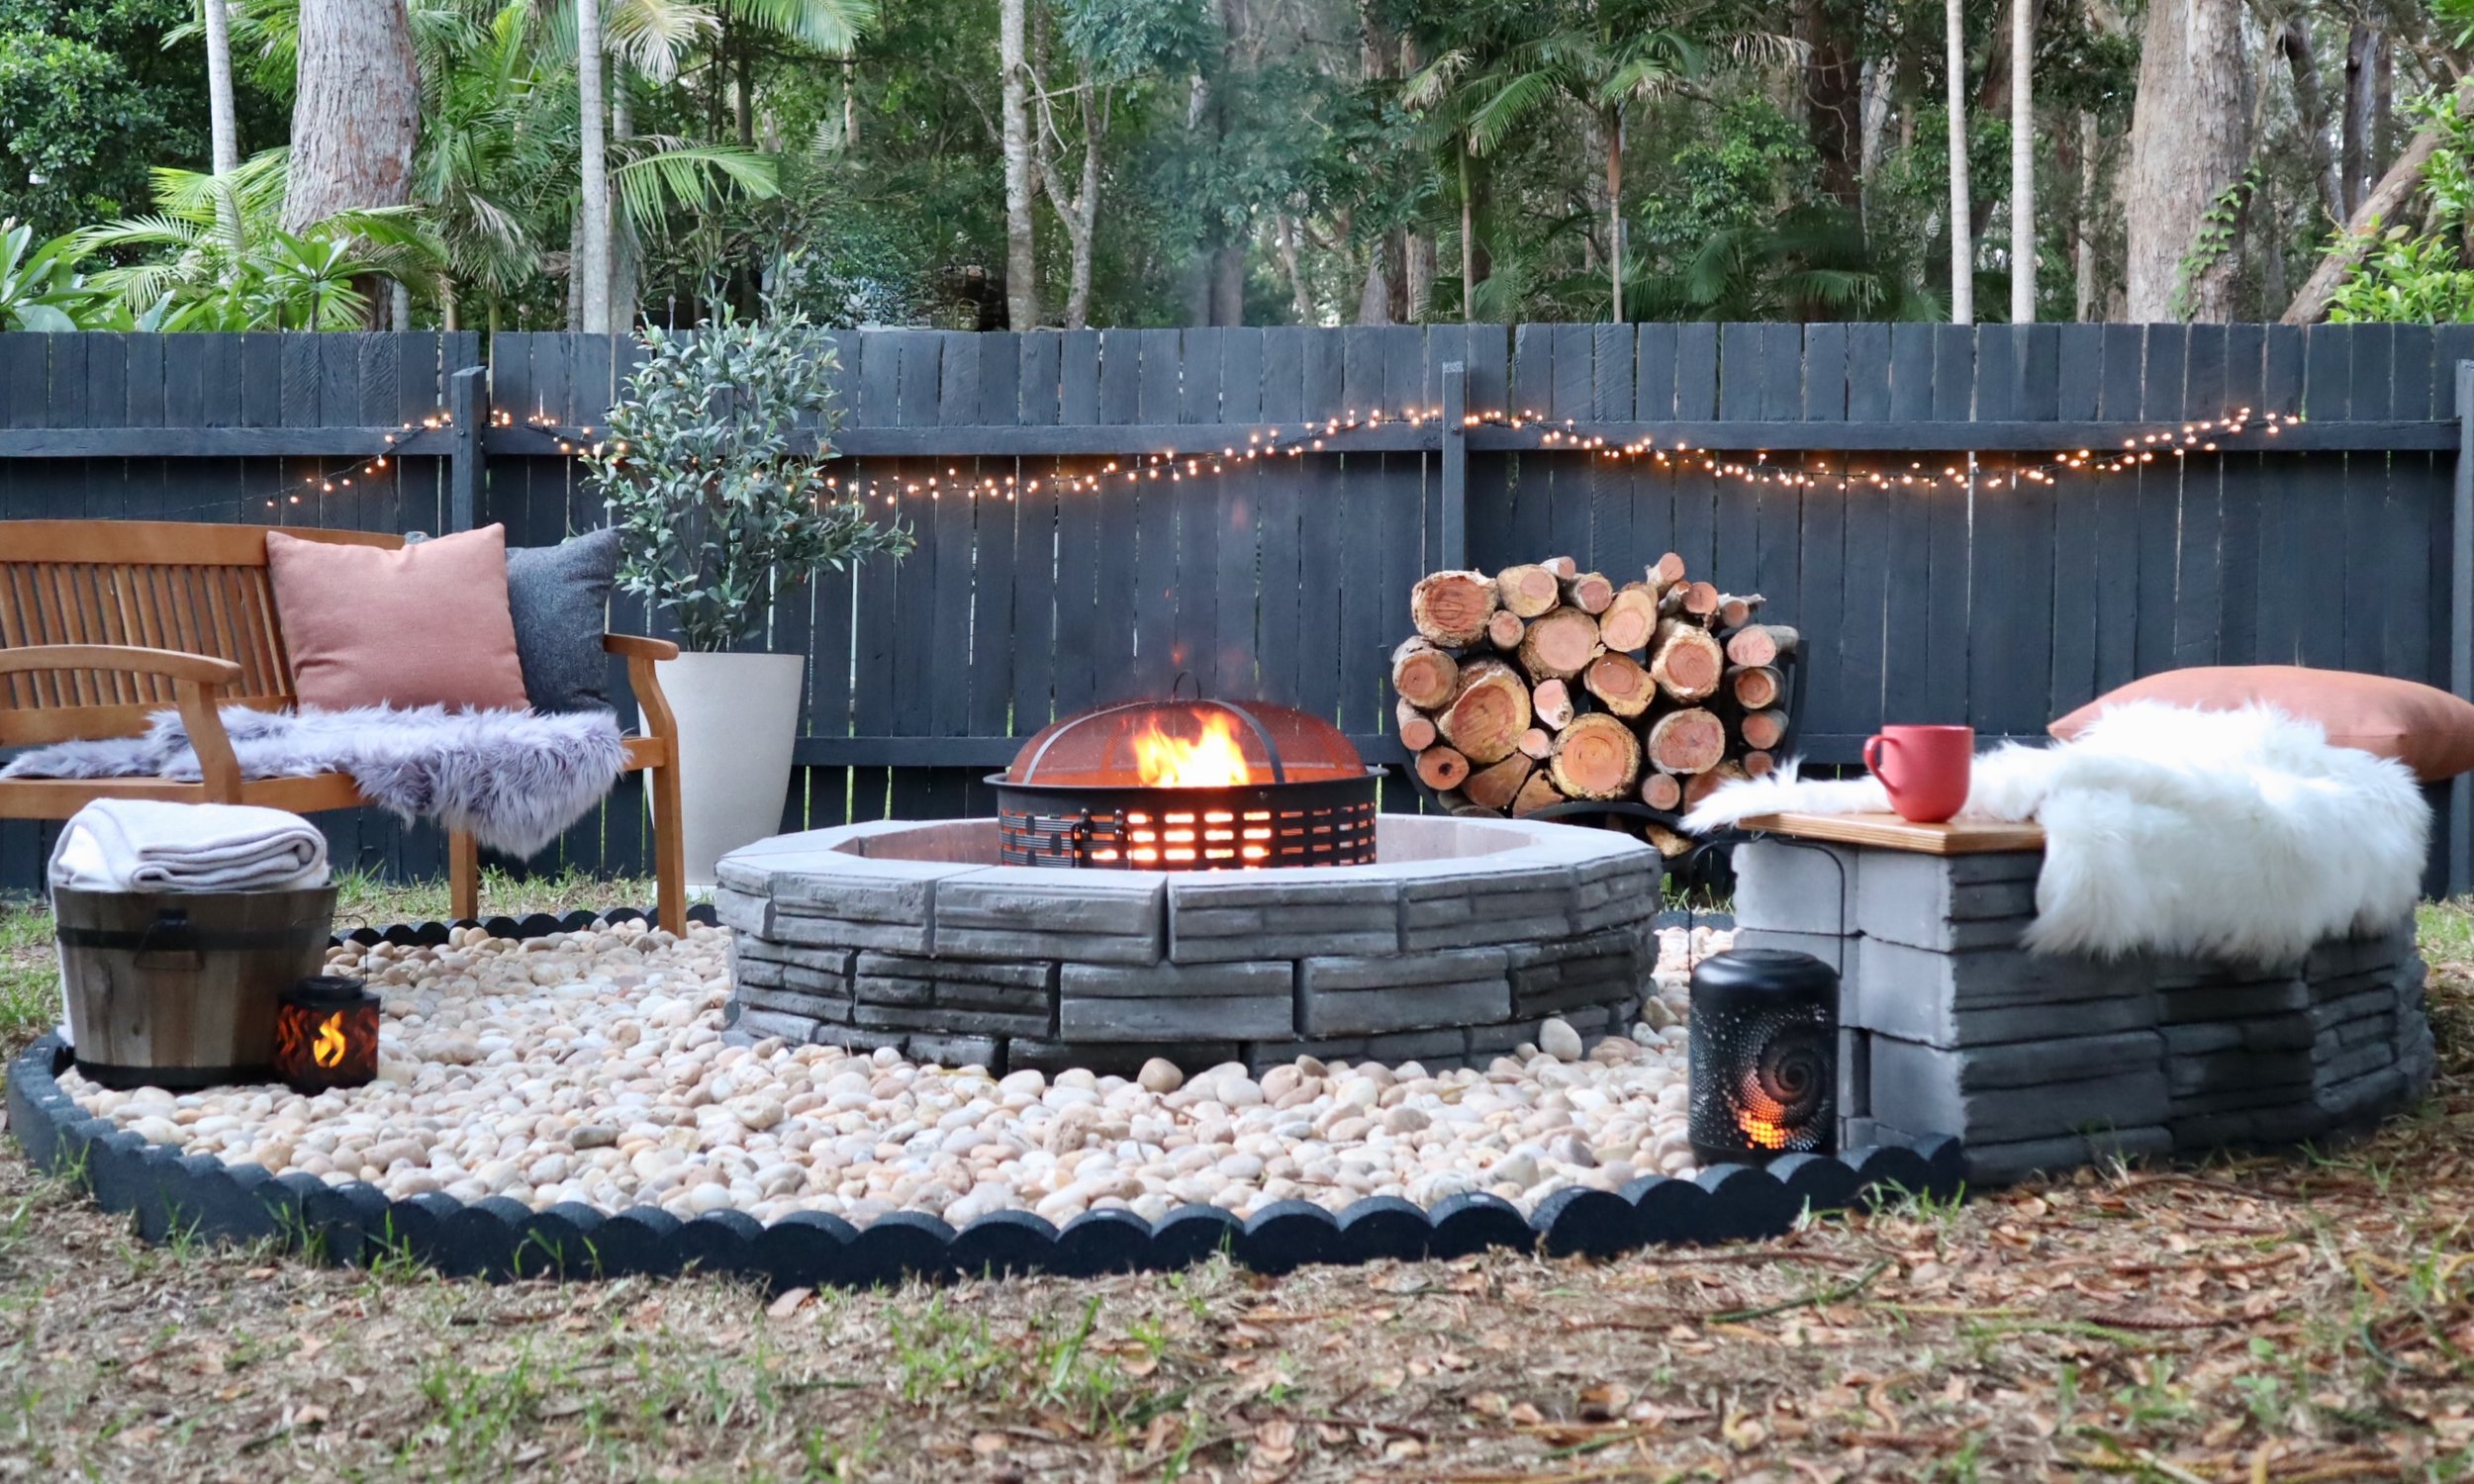 Outdoor fire pit area with seating, lights, and stacked wood